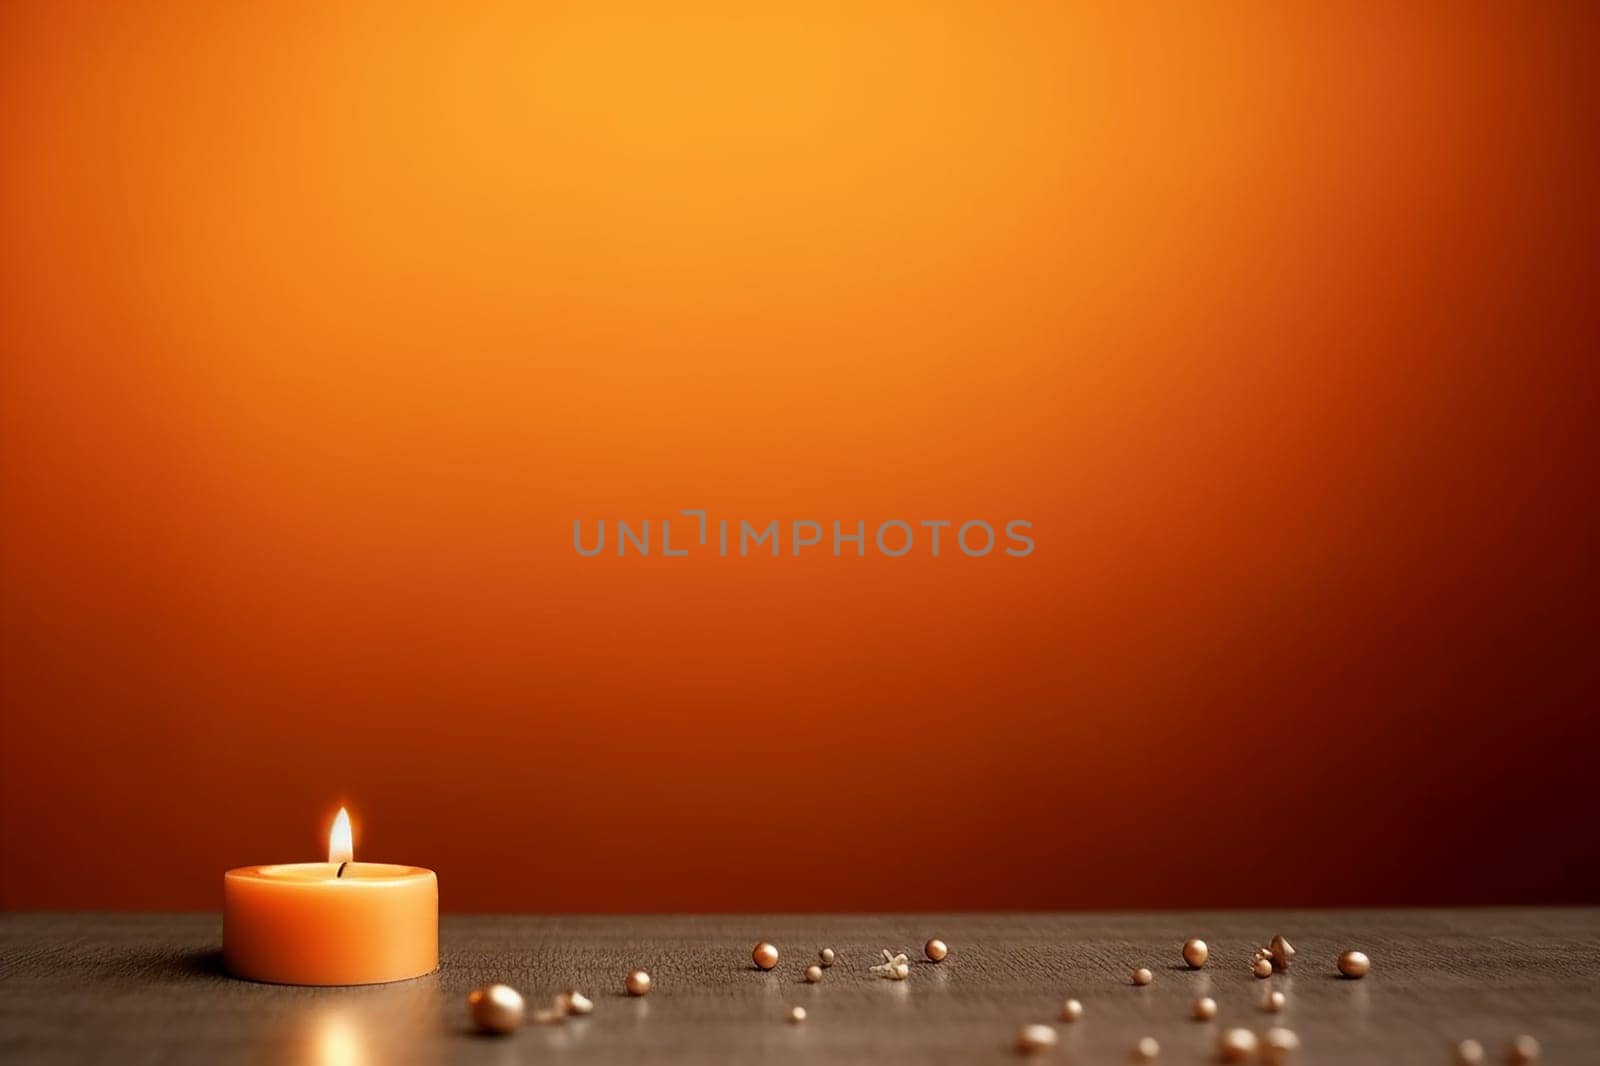 Single lit candle with small beads on a wooden surface against an orange backdrop.